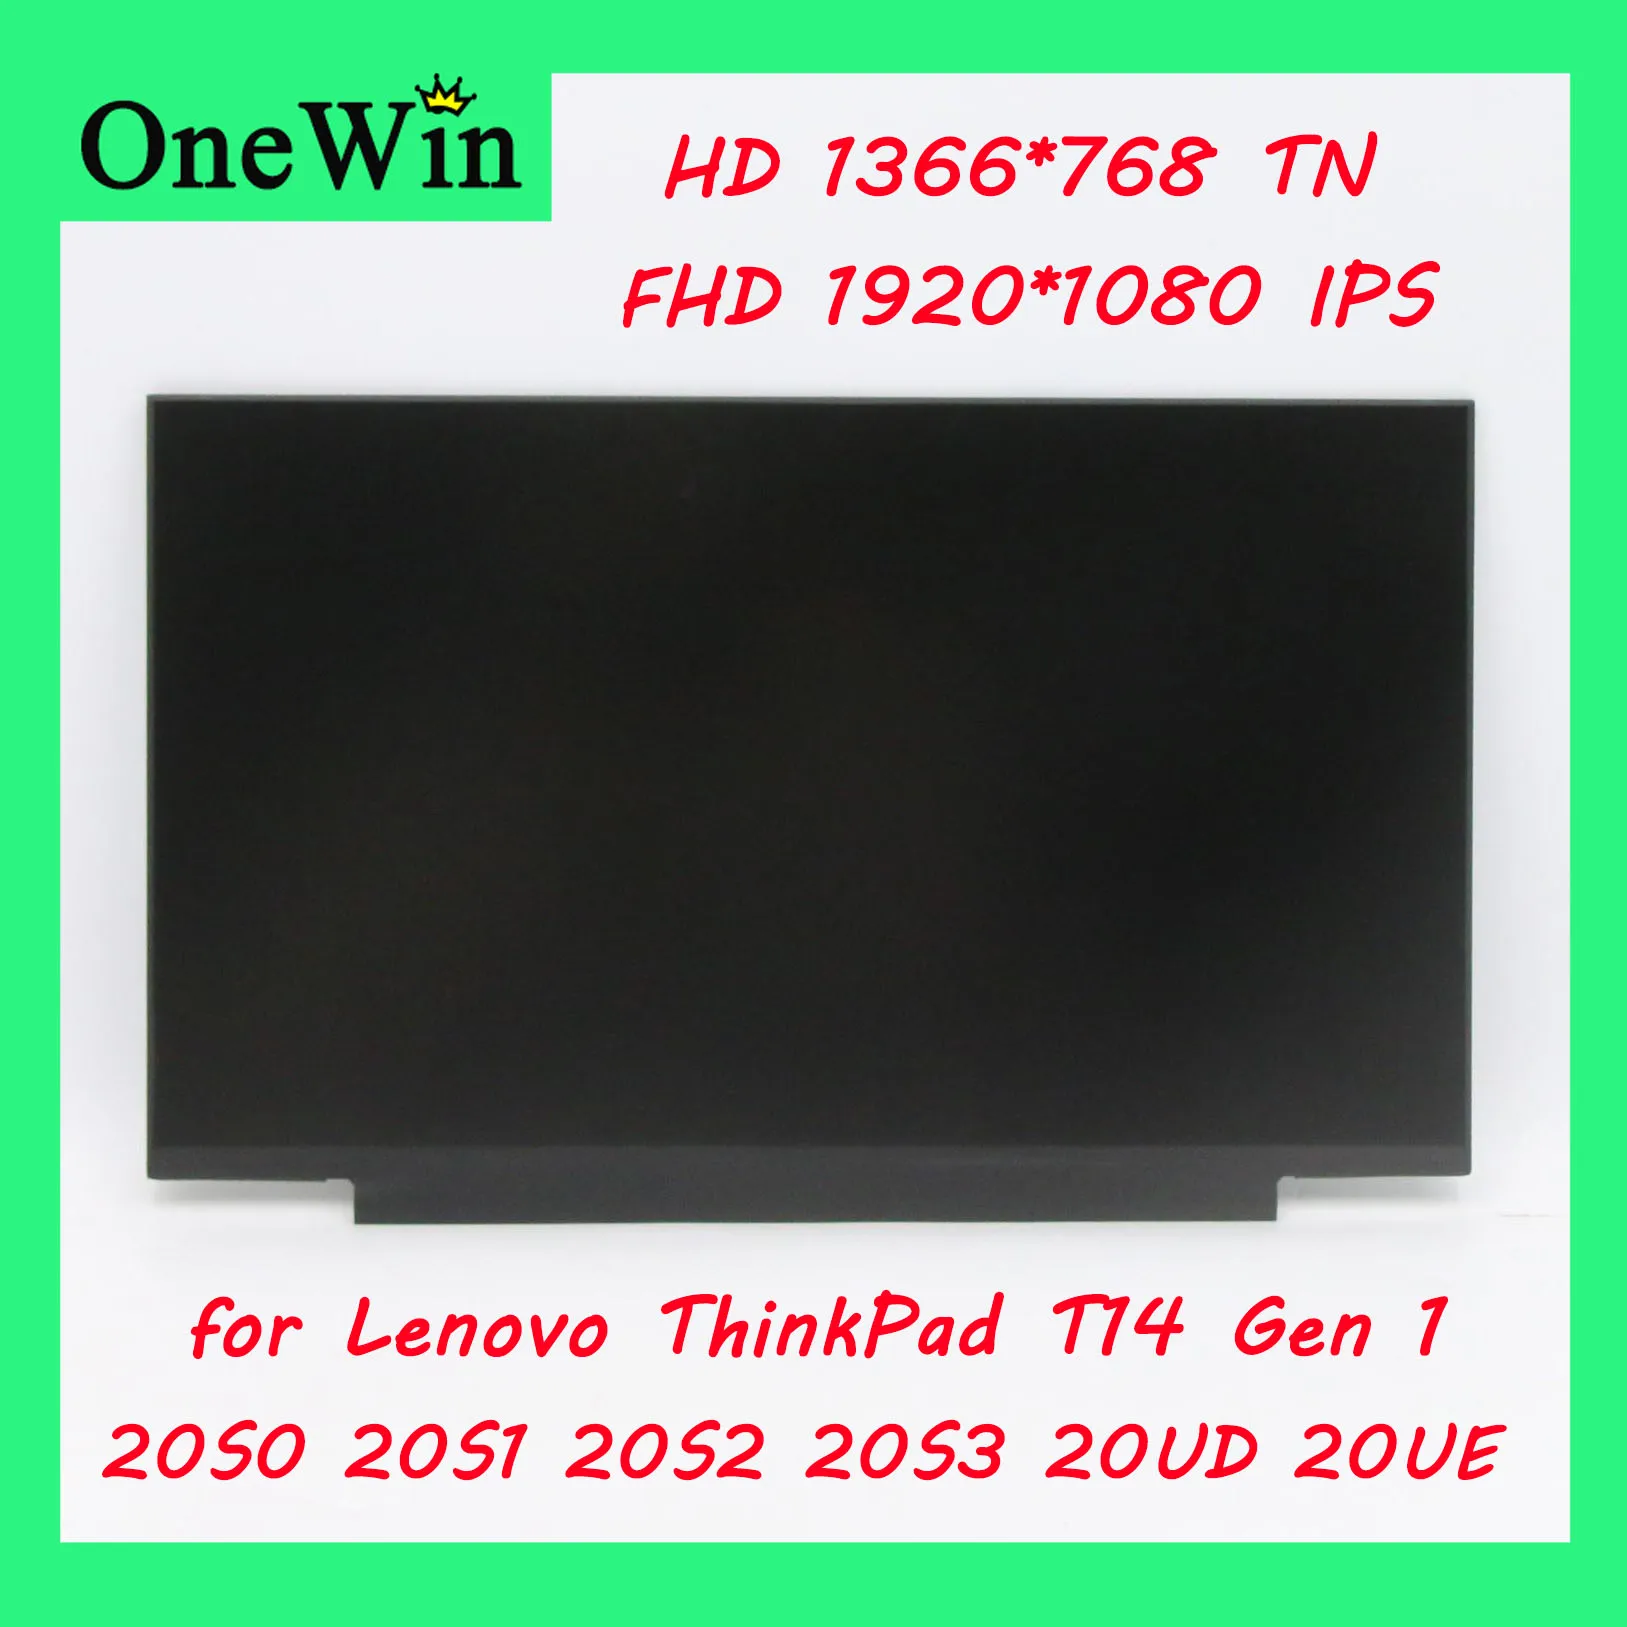 

for Lenovo ThinkPad T14 Gen 1 20S0 20S1 20S2 20S3 20UD 20UE 14.0" LCD WLED Matrix Not Touch HD 1366 FHD 1920 IPS Slim eDP 30pins